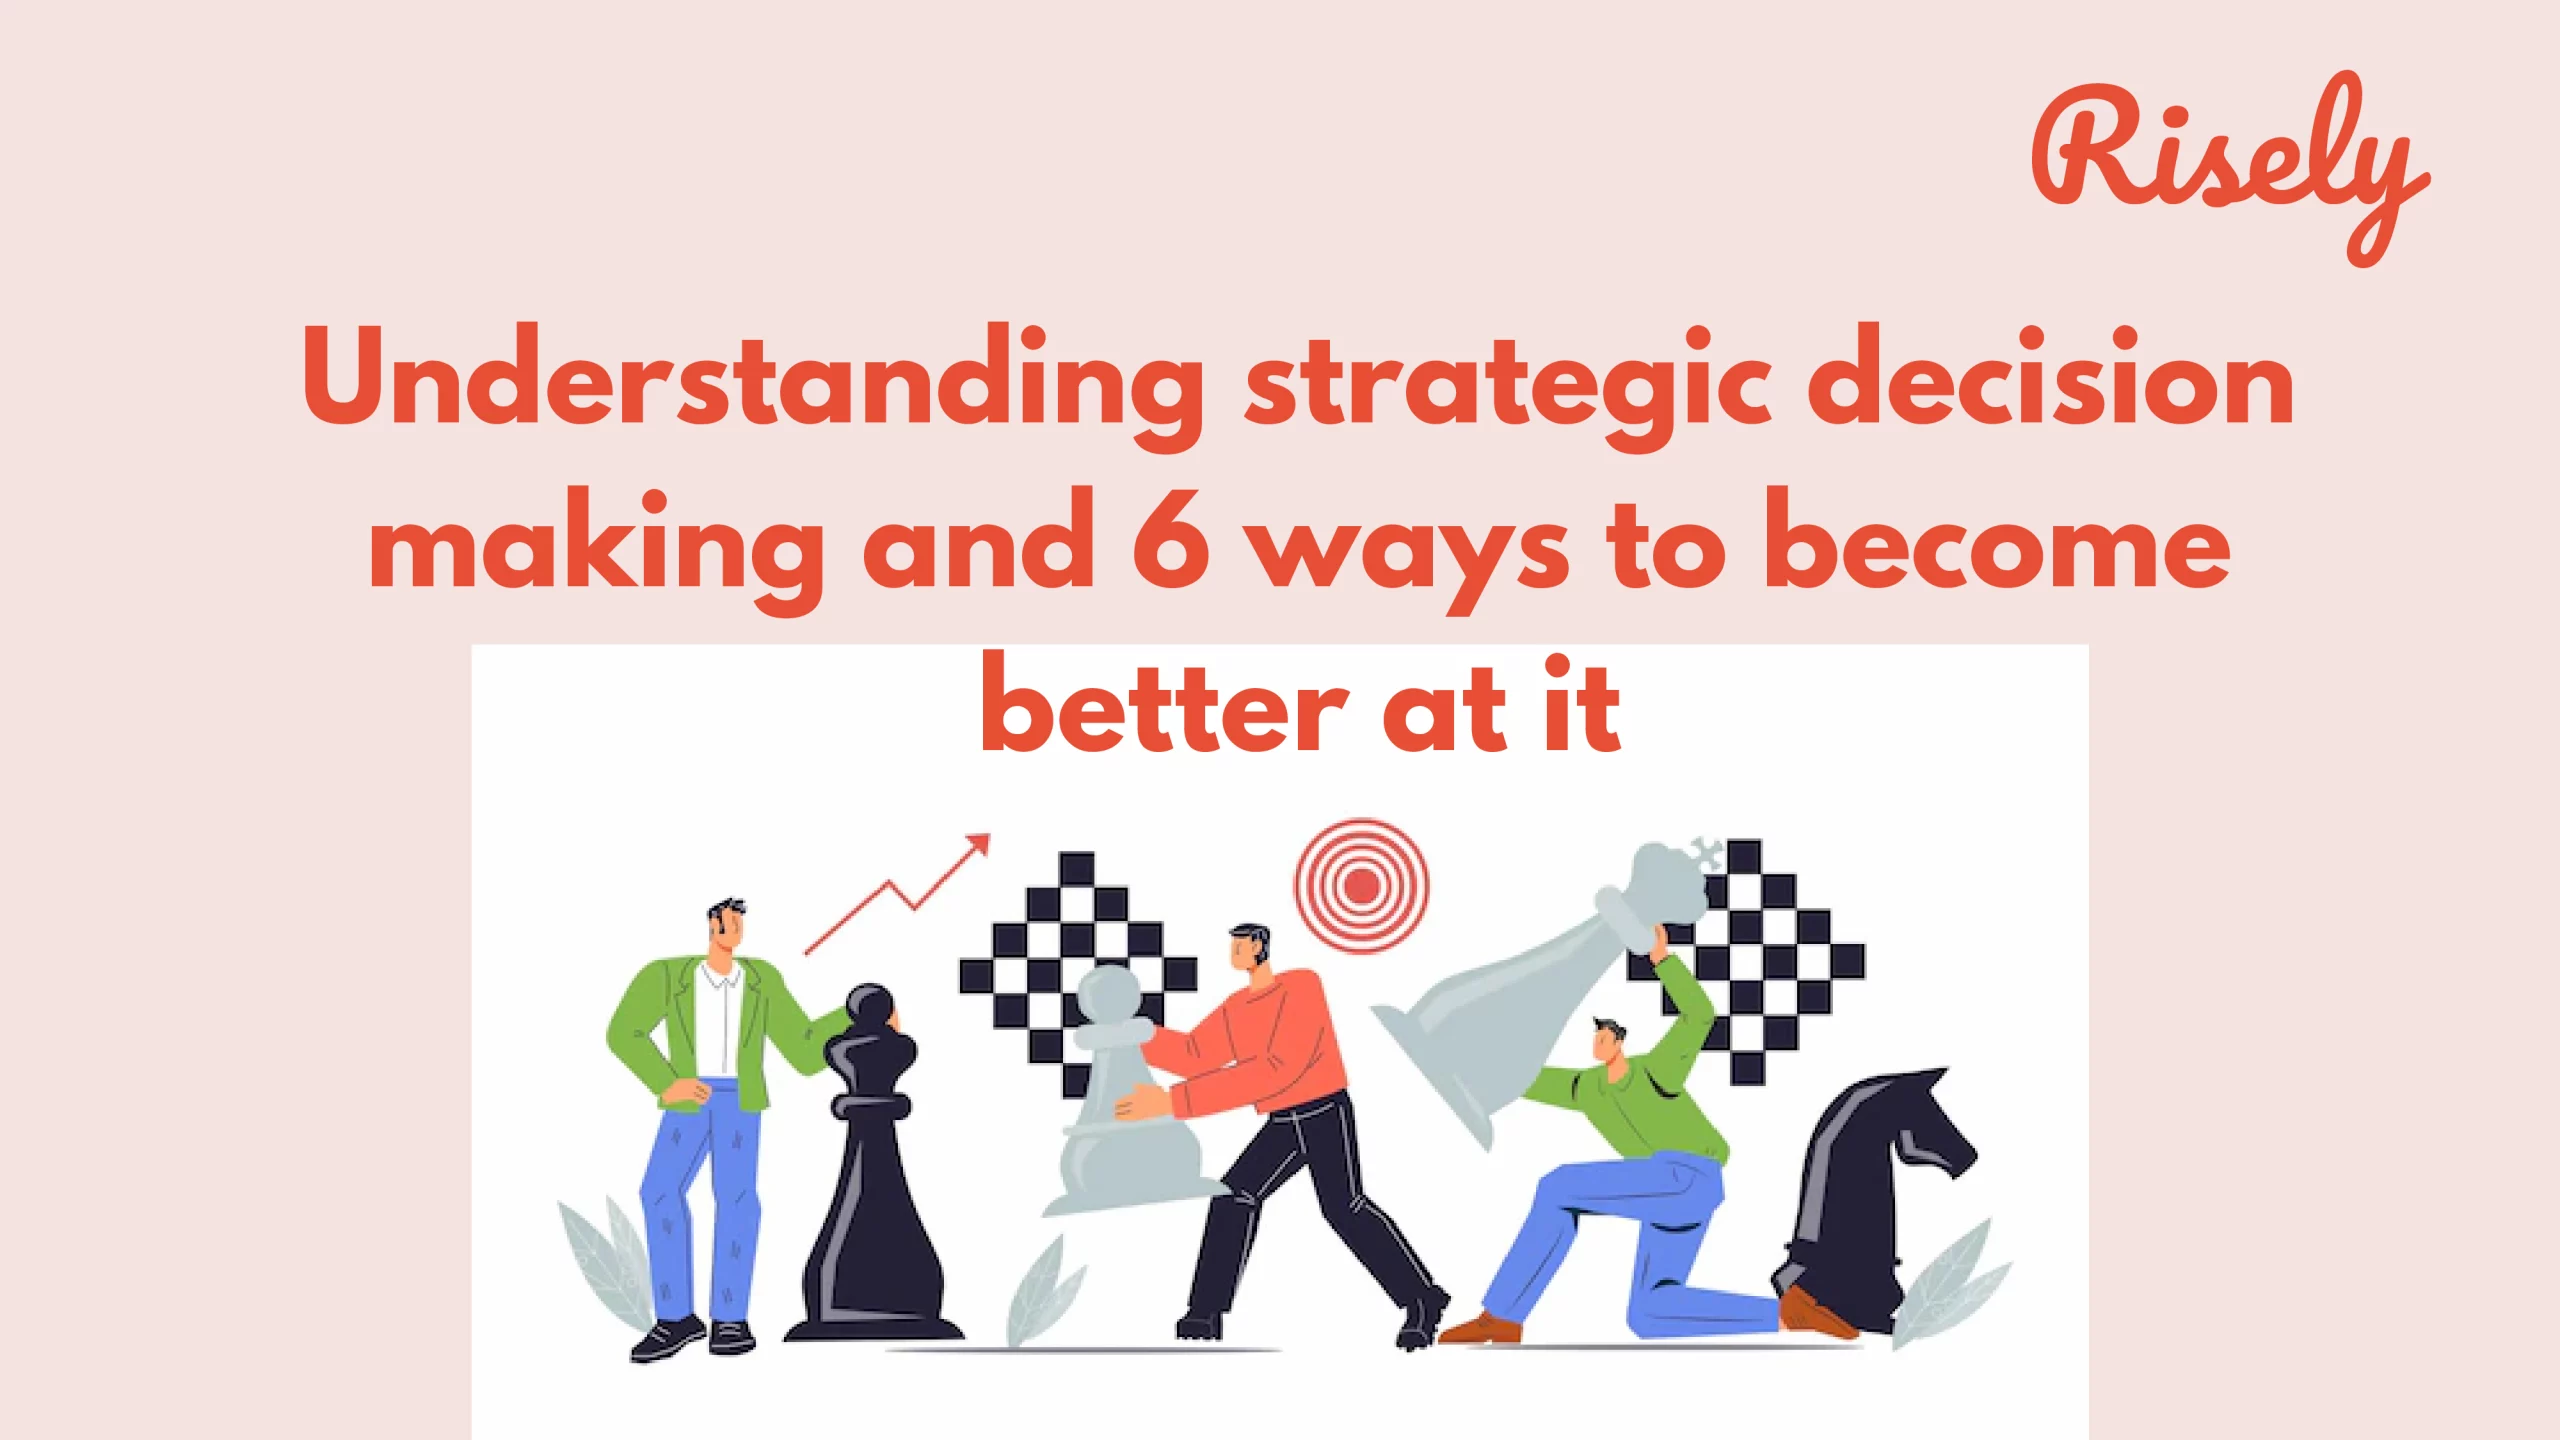 Understanding strategic decision making and 6 ways to become better at it